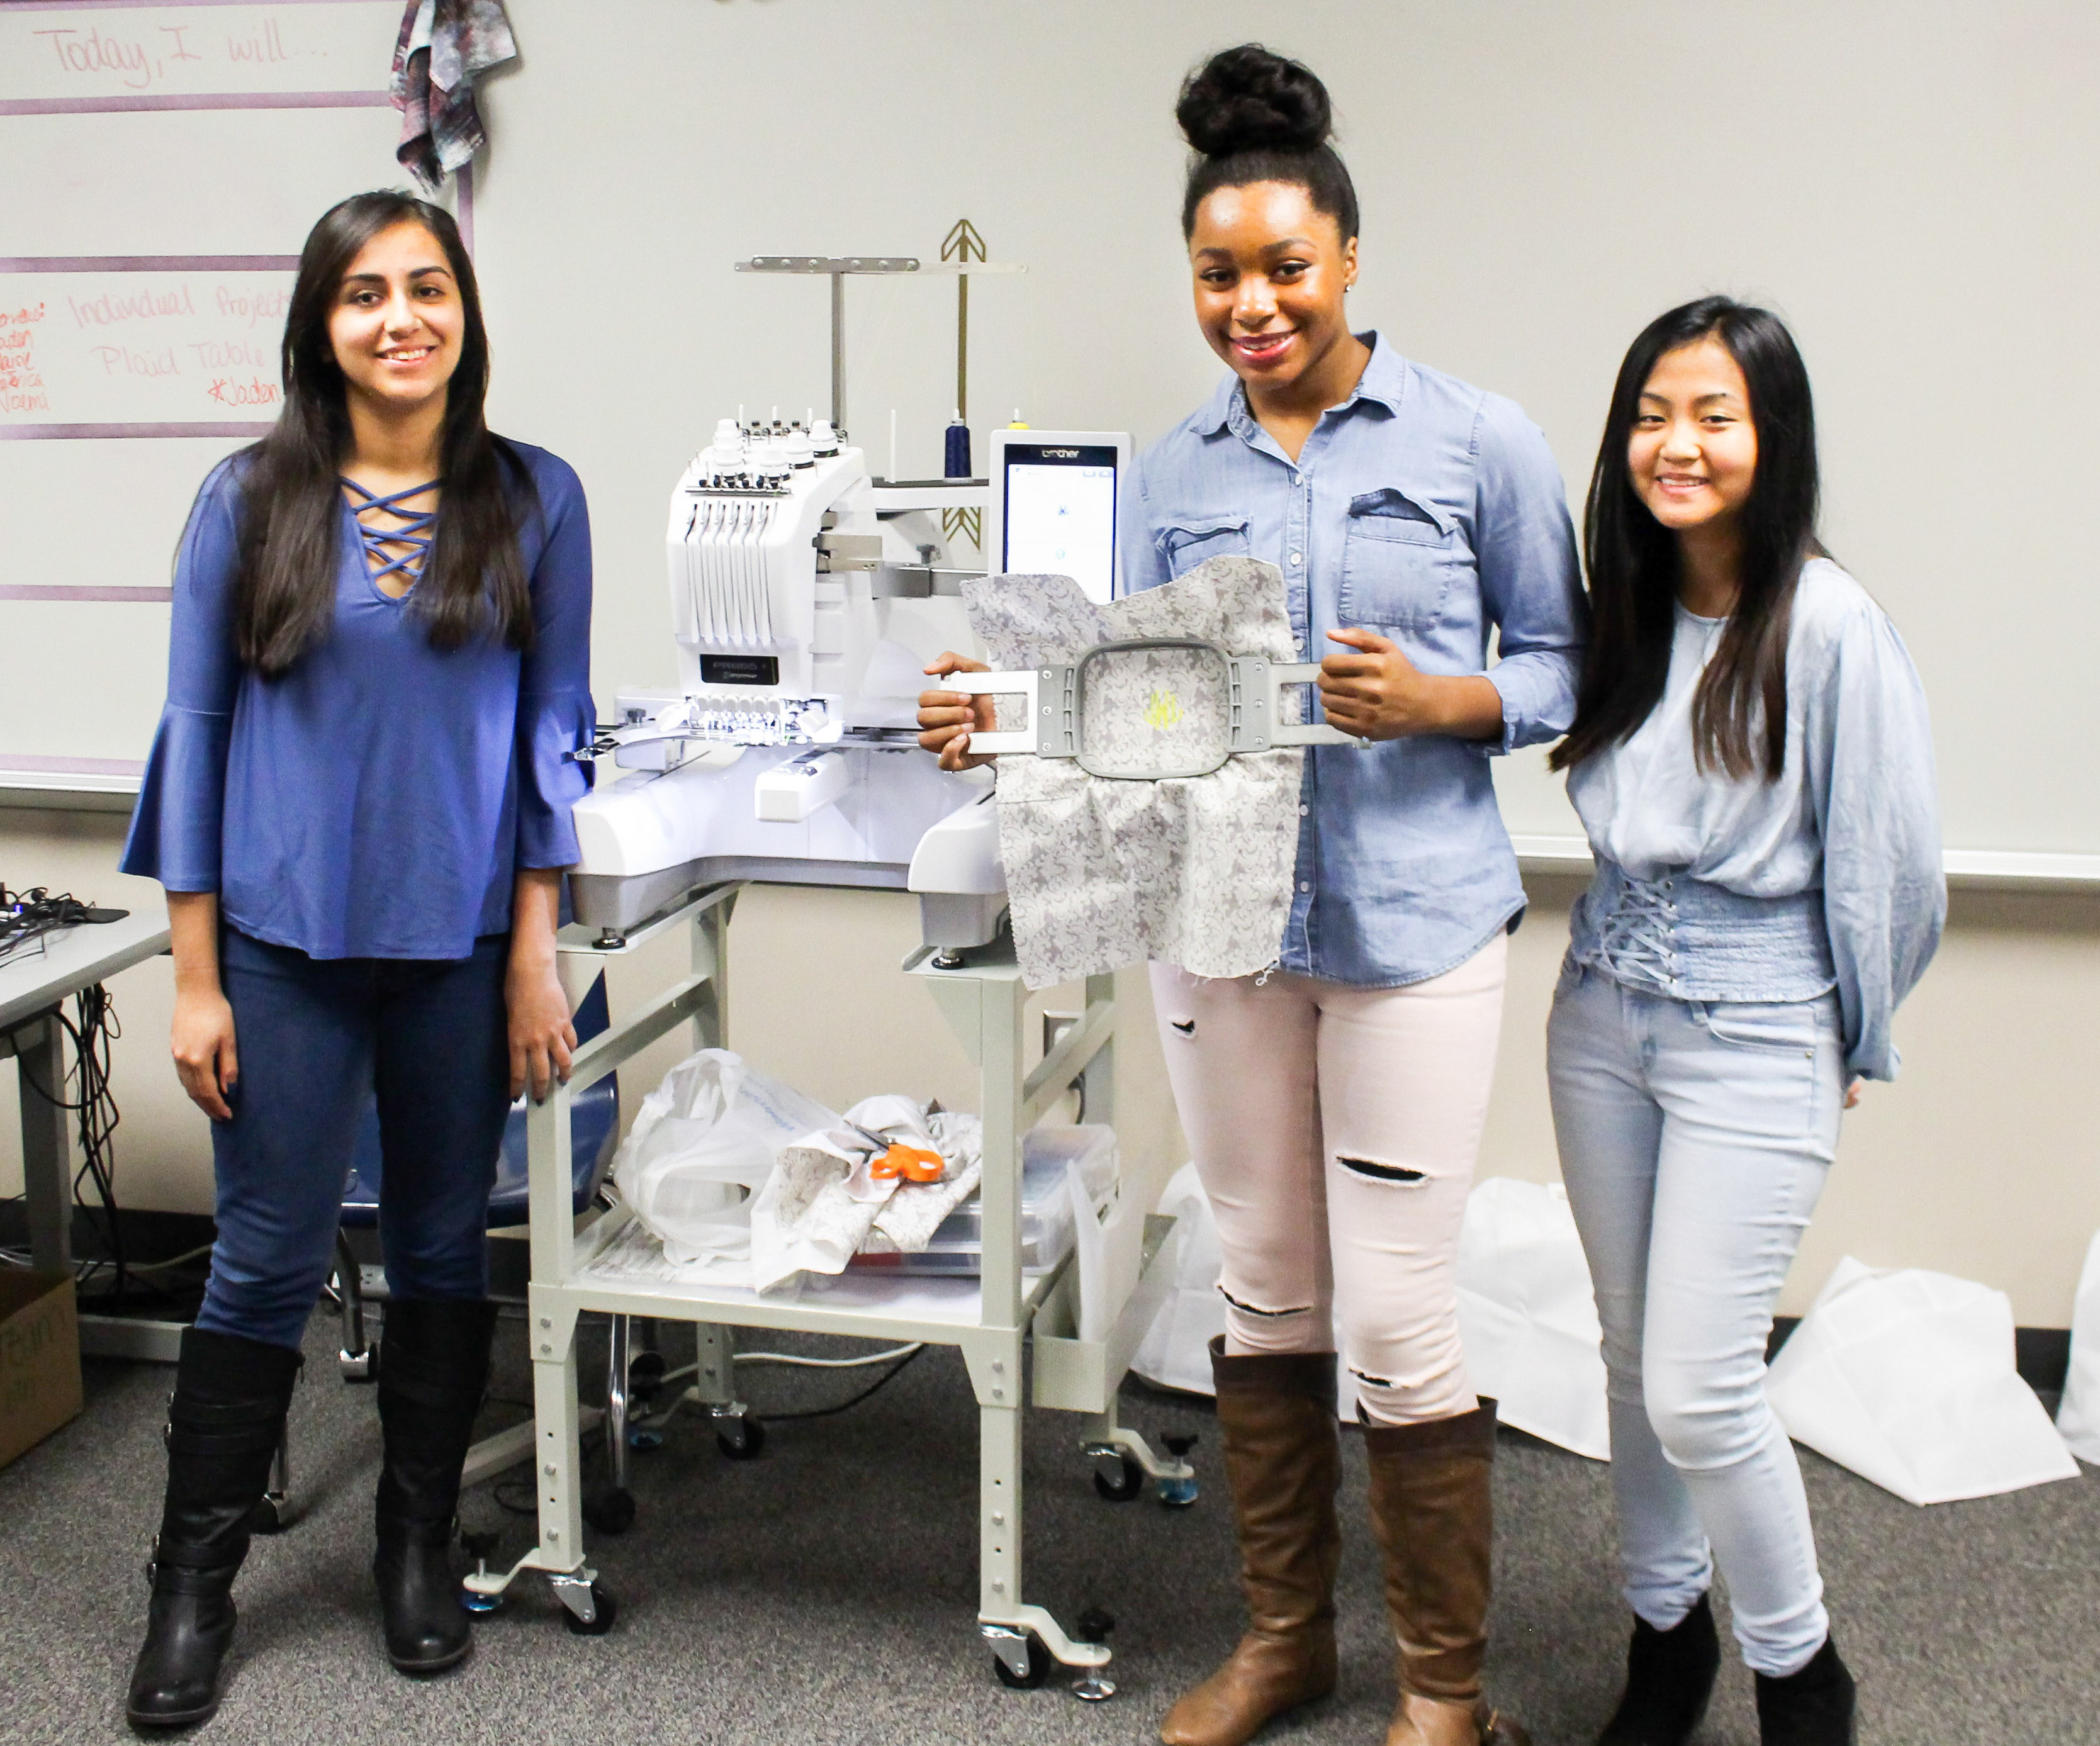 Sew cool LHS Fashion Design classes get new sewing